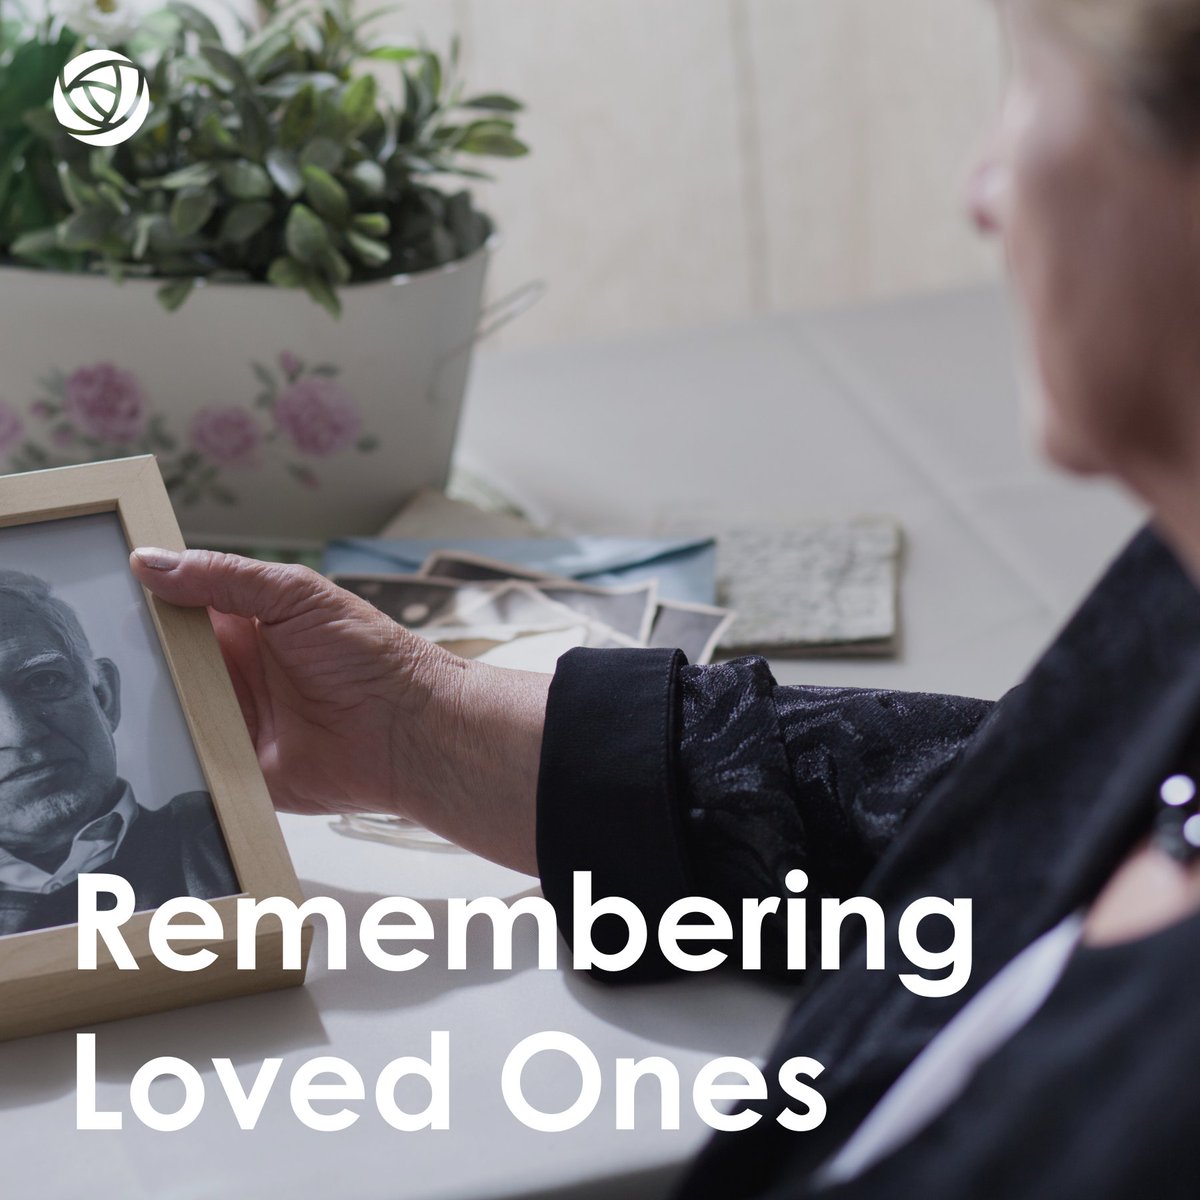 Our latest playlist features timeless songs that celebrate enduring love. If you're remembering a loved one today, we hope it brings you some comfort 🤍 #ValentinesDay open.spotify.com/playlist/1J9NM…